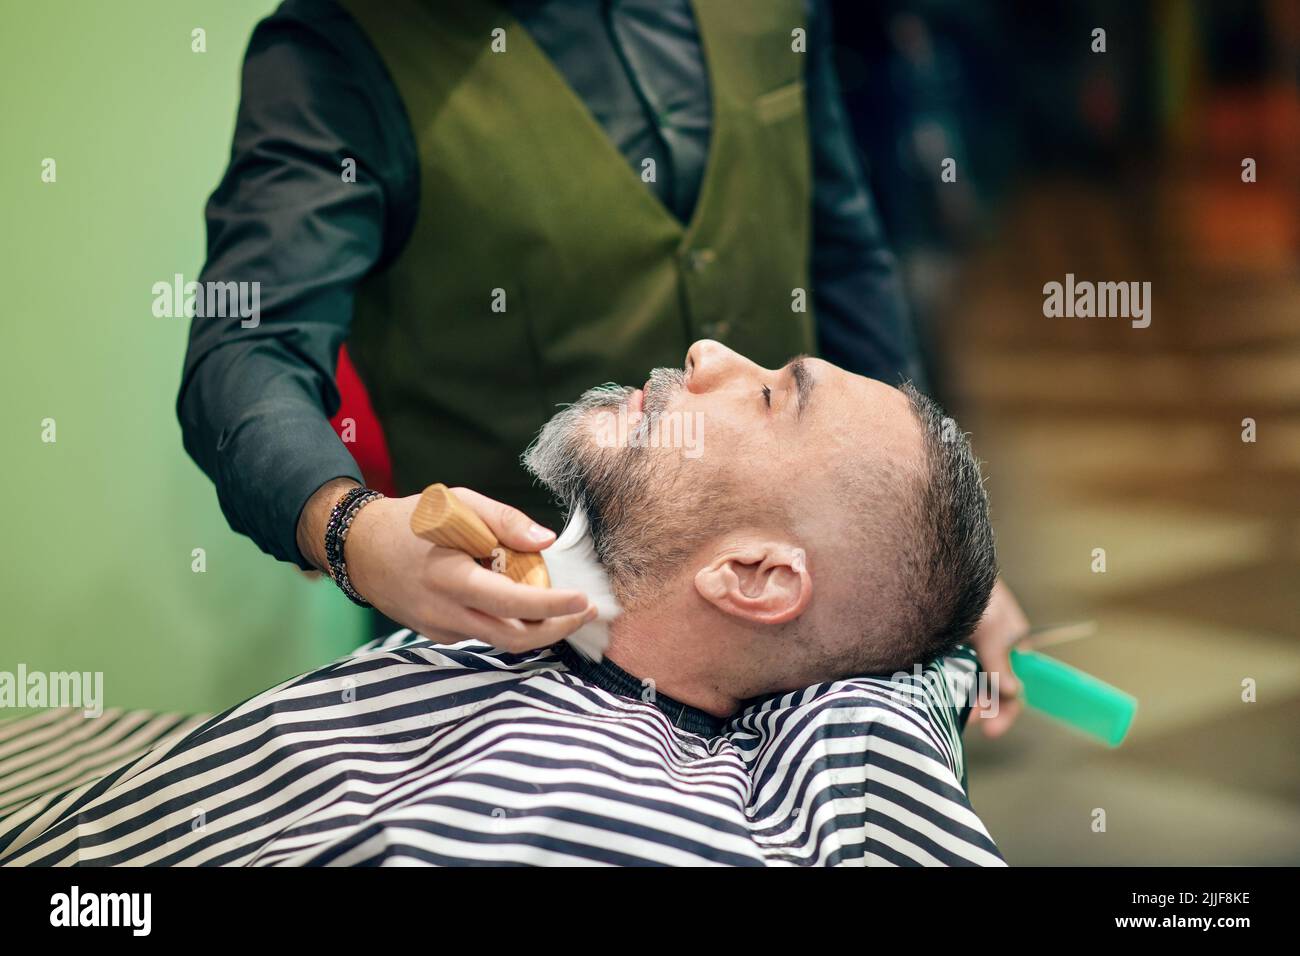 Crop barber removing beard hair from neck of man during work in barbershop Stock Photo